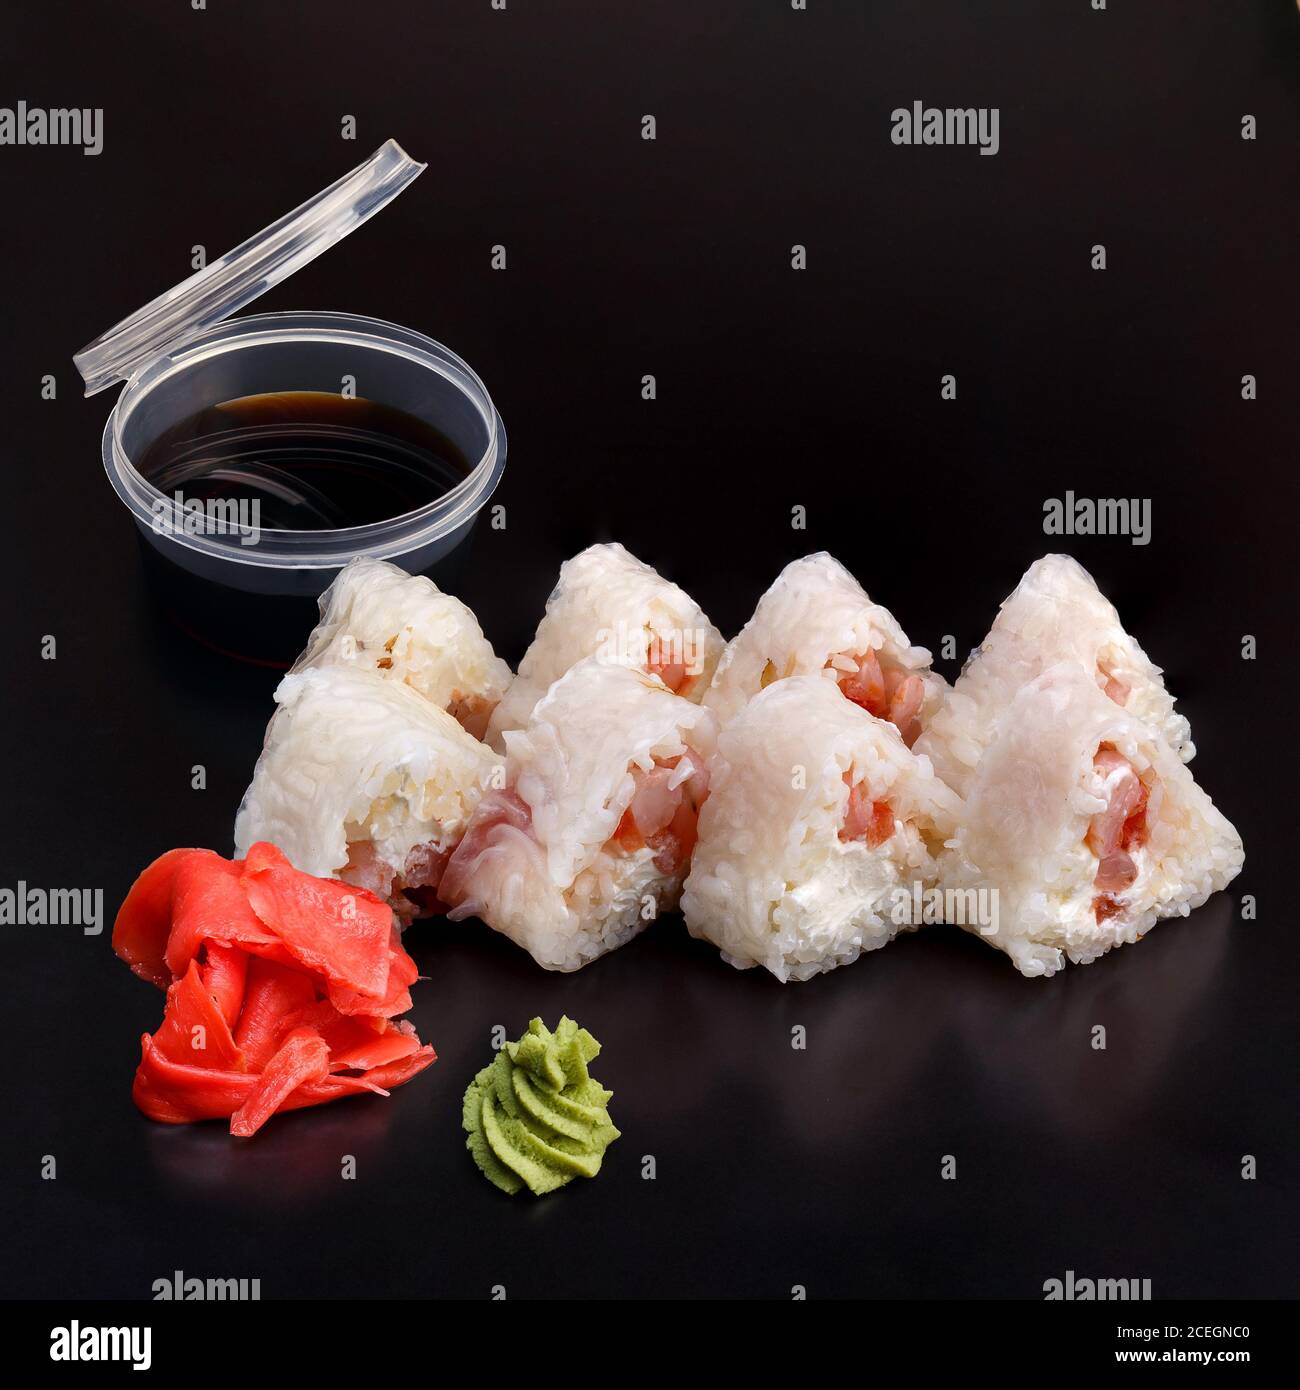 https://c8.alamy.com/comp/2CEGNC0/traditional-delicious-fresh-soft-shrimp-roll-set-on-a-black-background-with-reflection-sushi-roll-with-rice-rice-paper-shrimp-cream-cheese-tomato-2CEGNC0.jpg